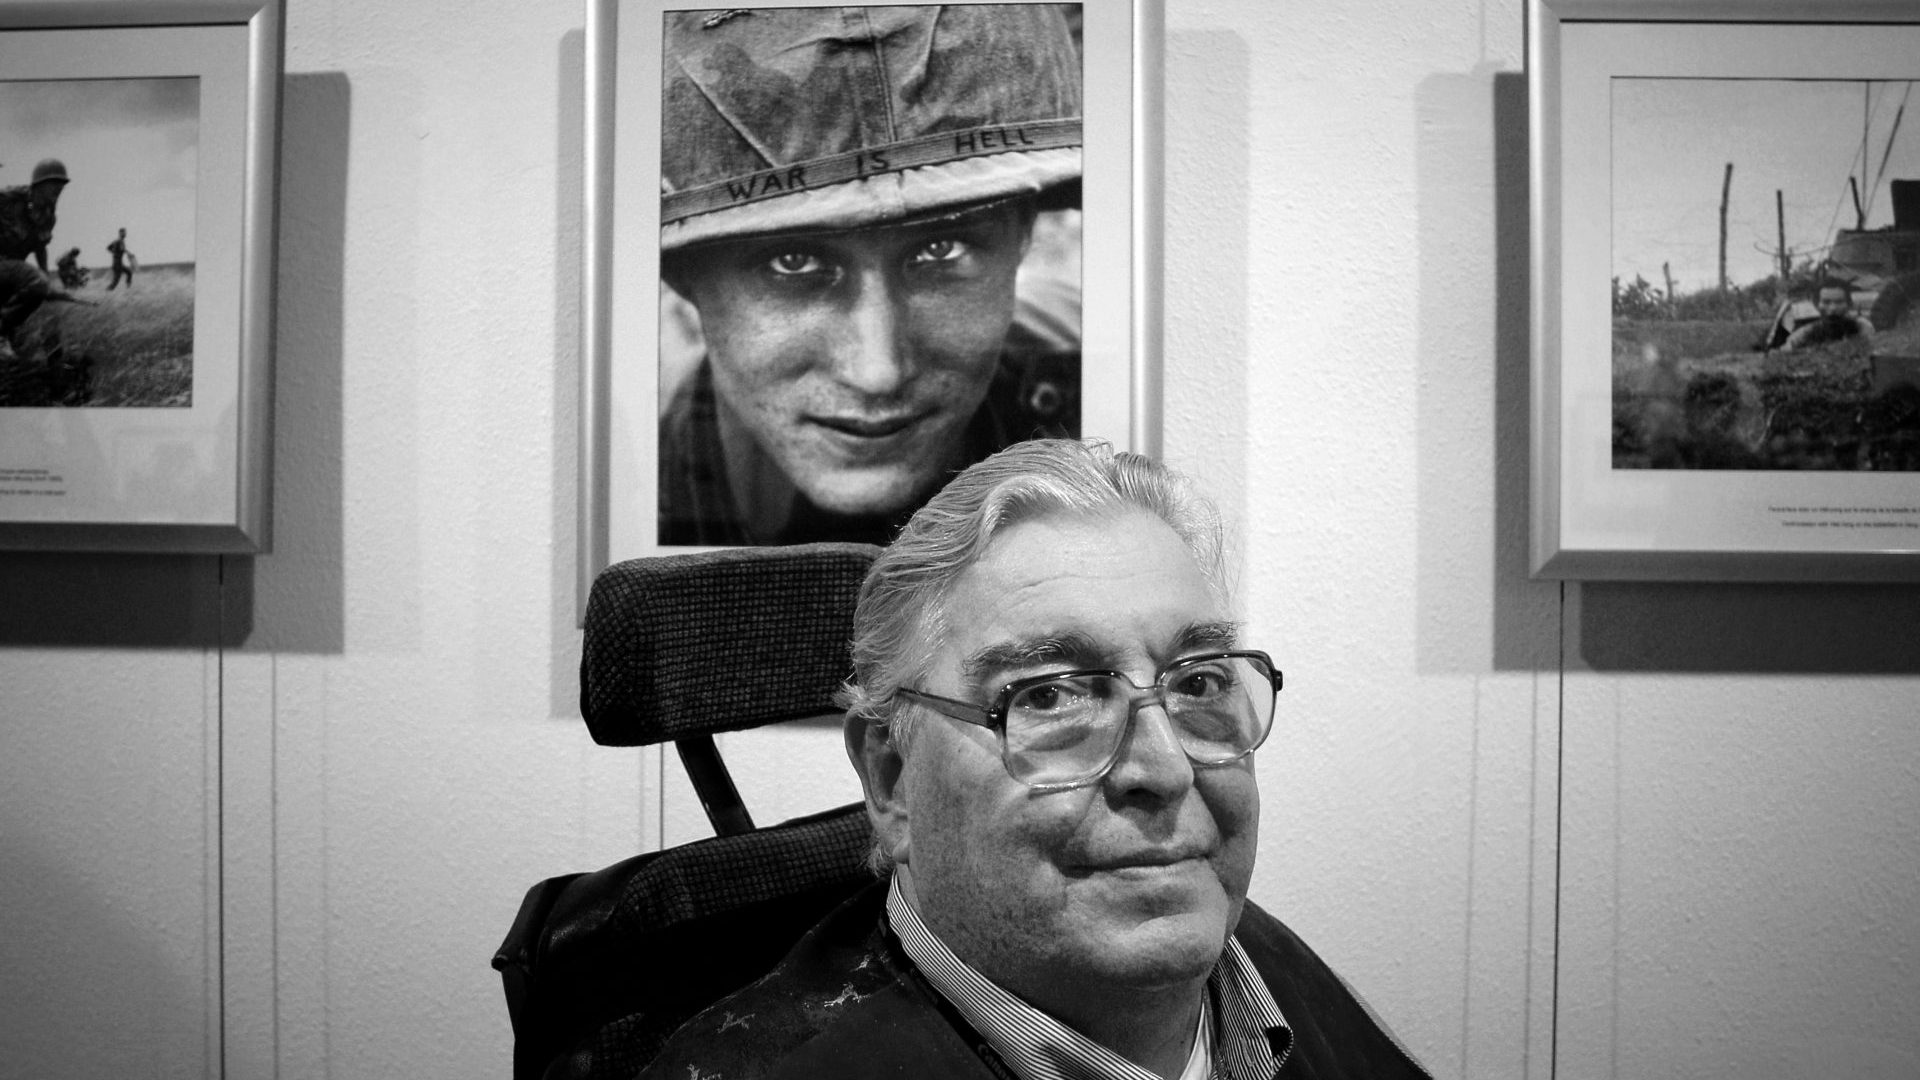 War photojournalist 
and two-time Pulitzer 
prize-winner Horst 
Faas poses in front 
of his images at the 
International Festival 
of Photojournalism in 
Perpignan, France, 2008. Photo: Jeff Pachoud/
AFP/Getty